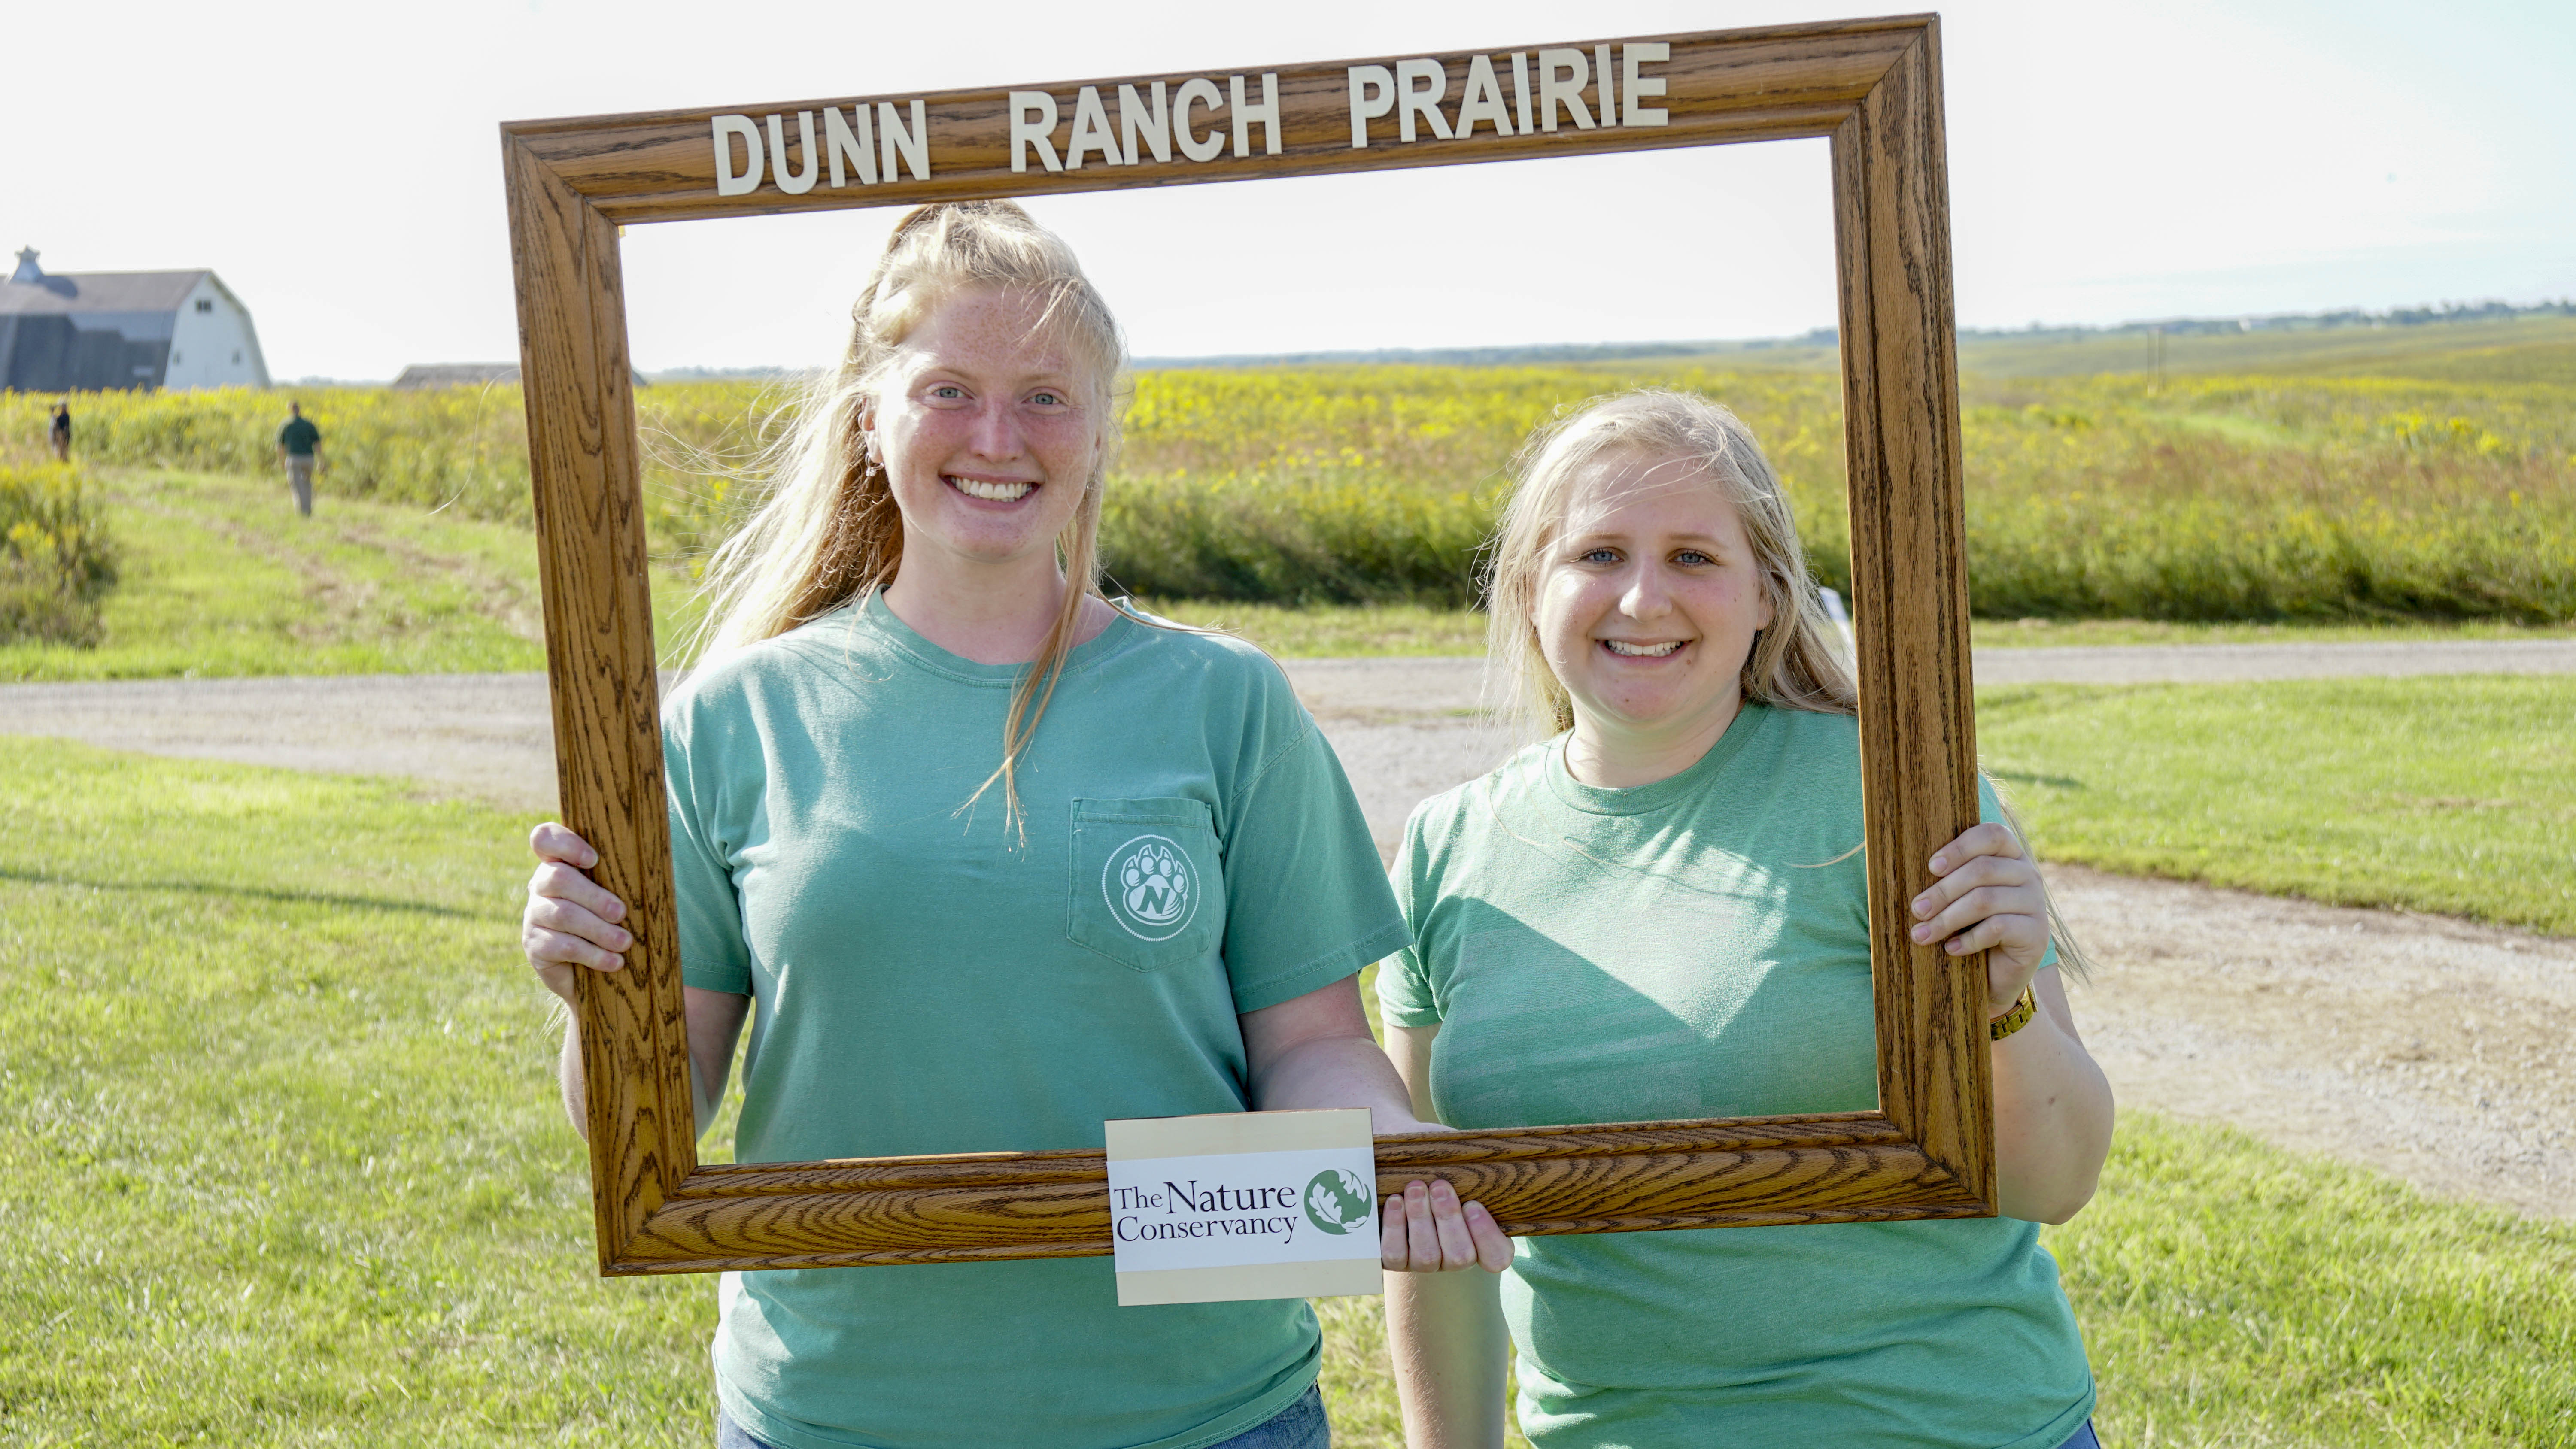 Two women smile and pose while holding up a wooden frame labeled 'Dunn Ranch Prairie.'